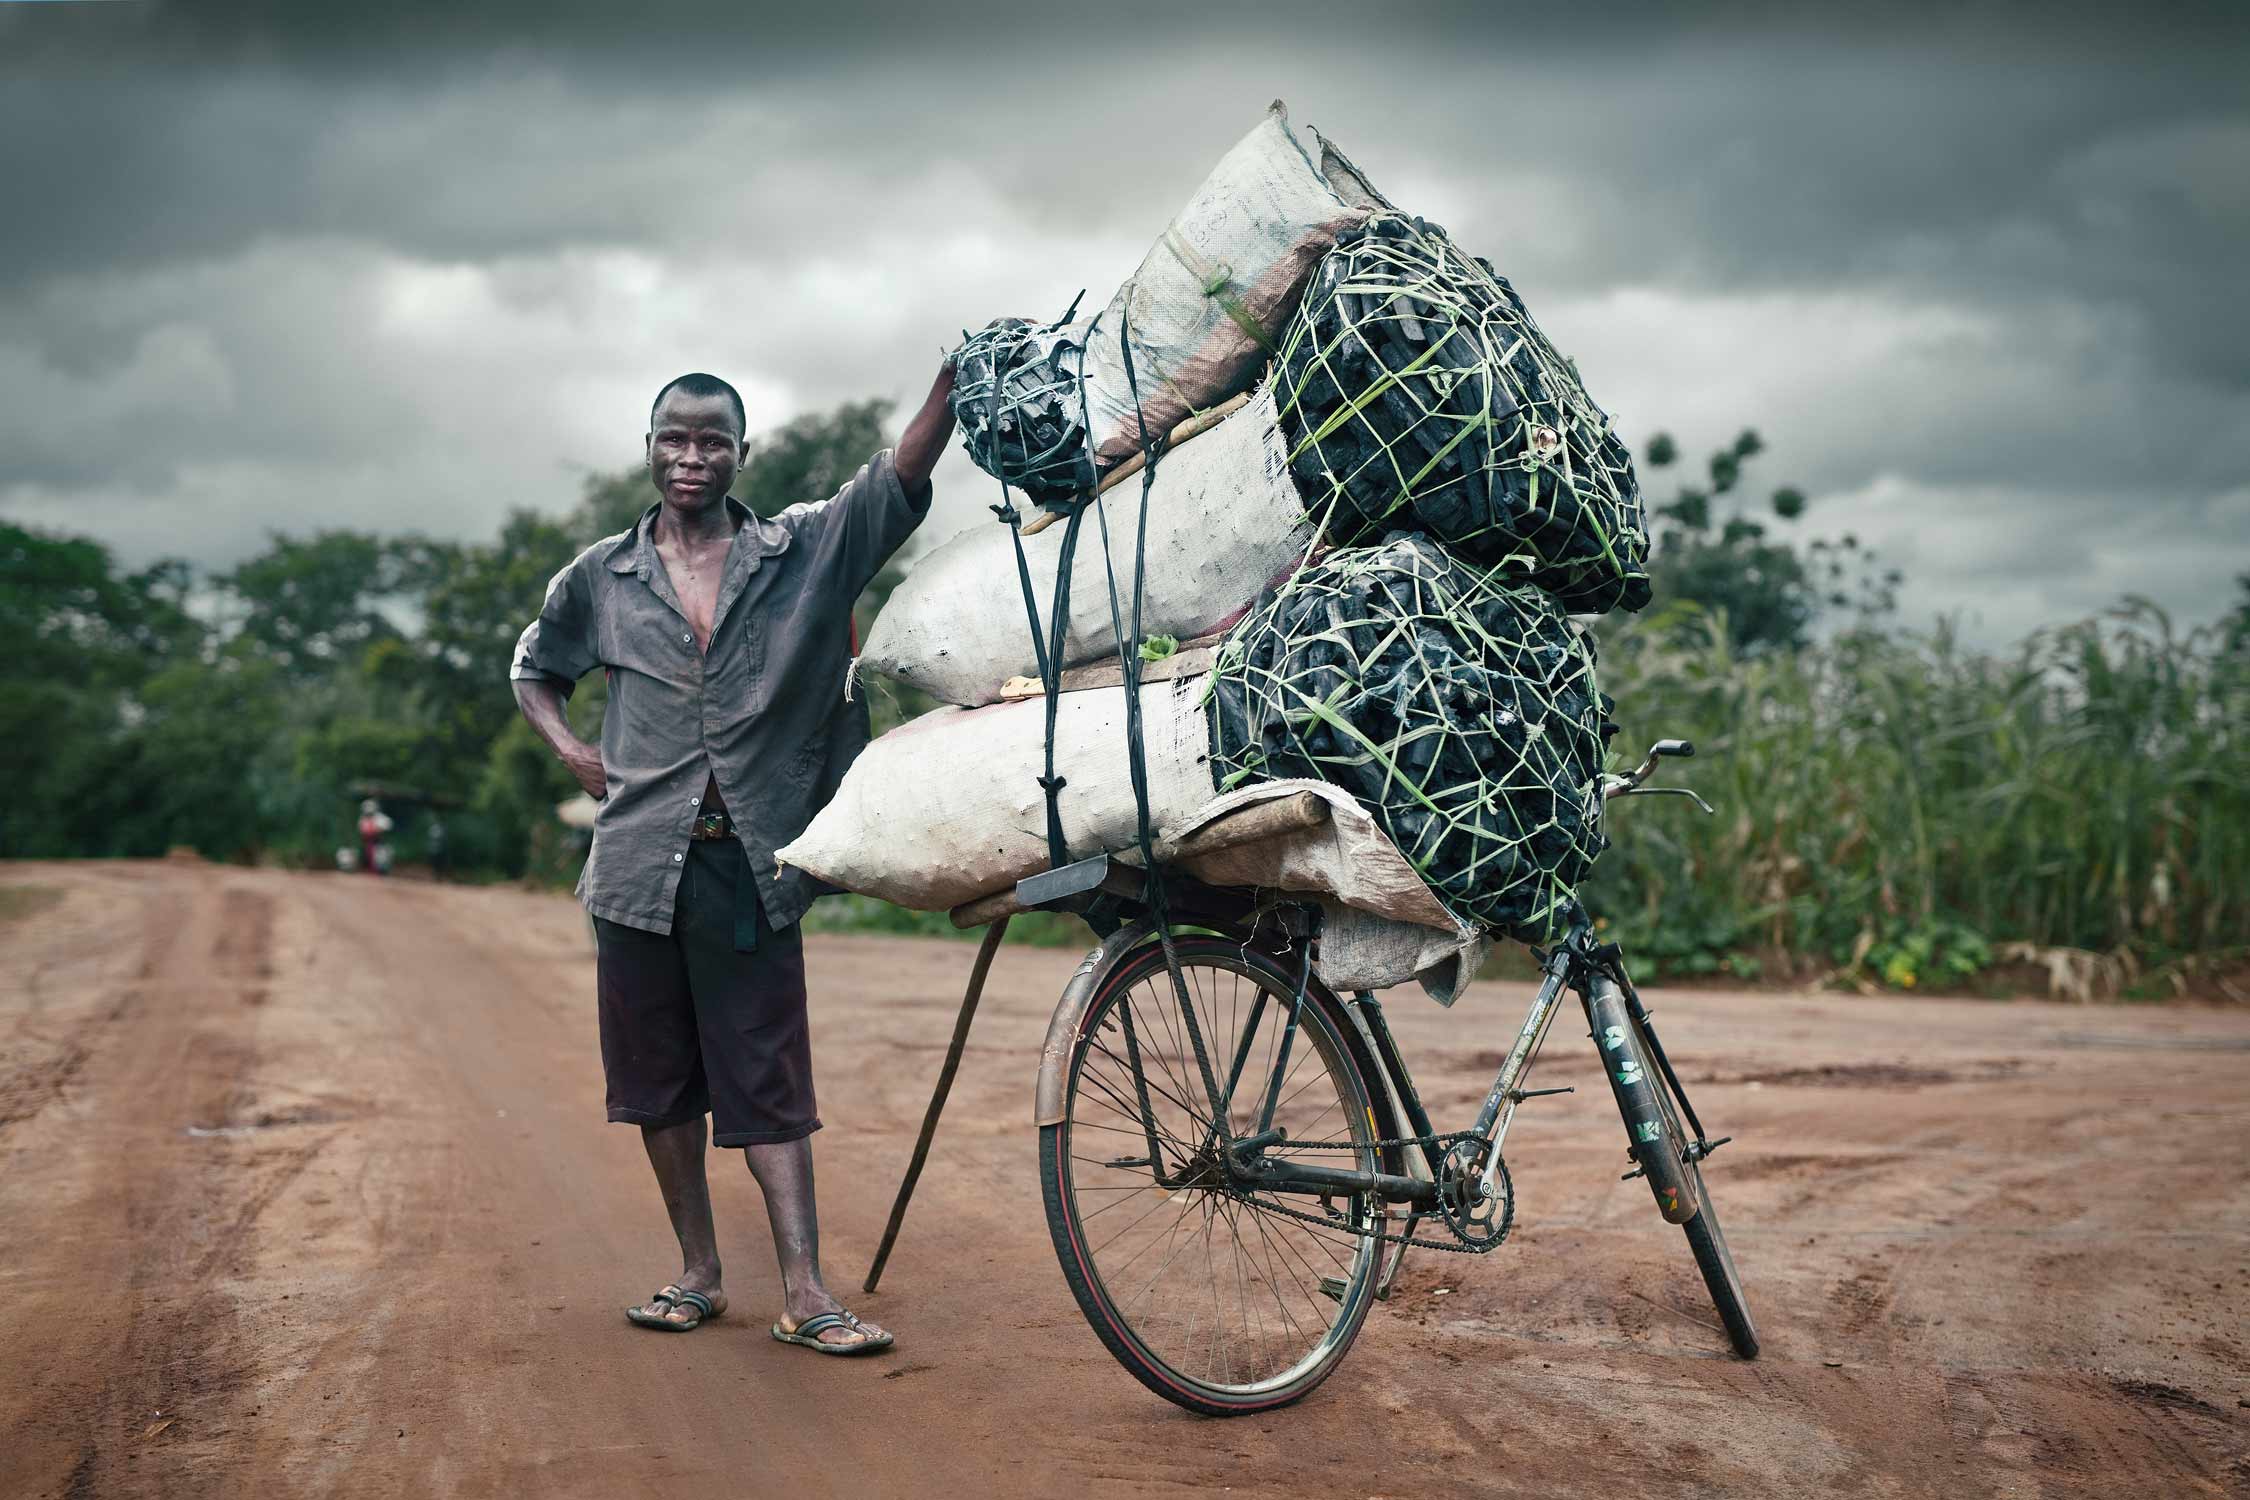 Stylised documentary portrait of rural Malawian charcoal seller standing by his charcoal-laden bicyle.